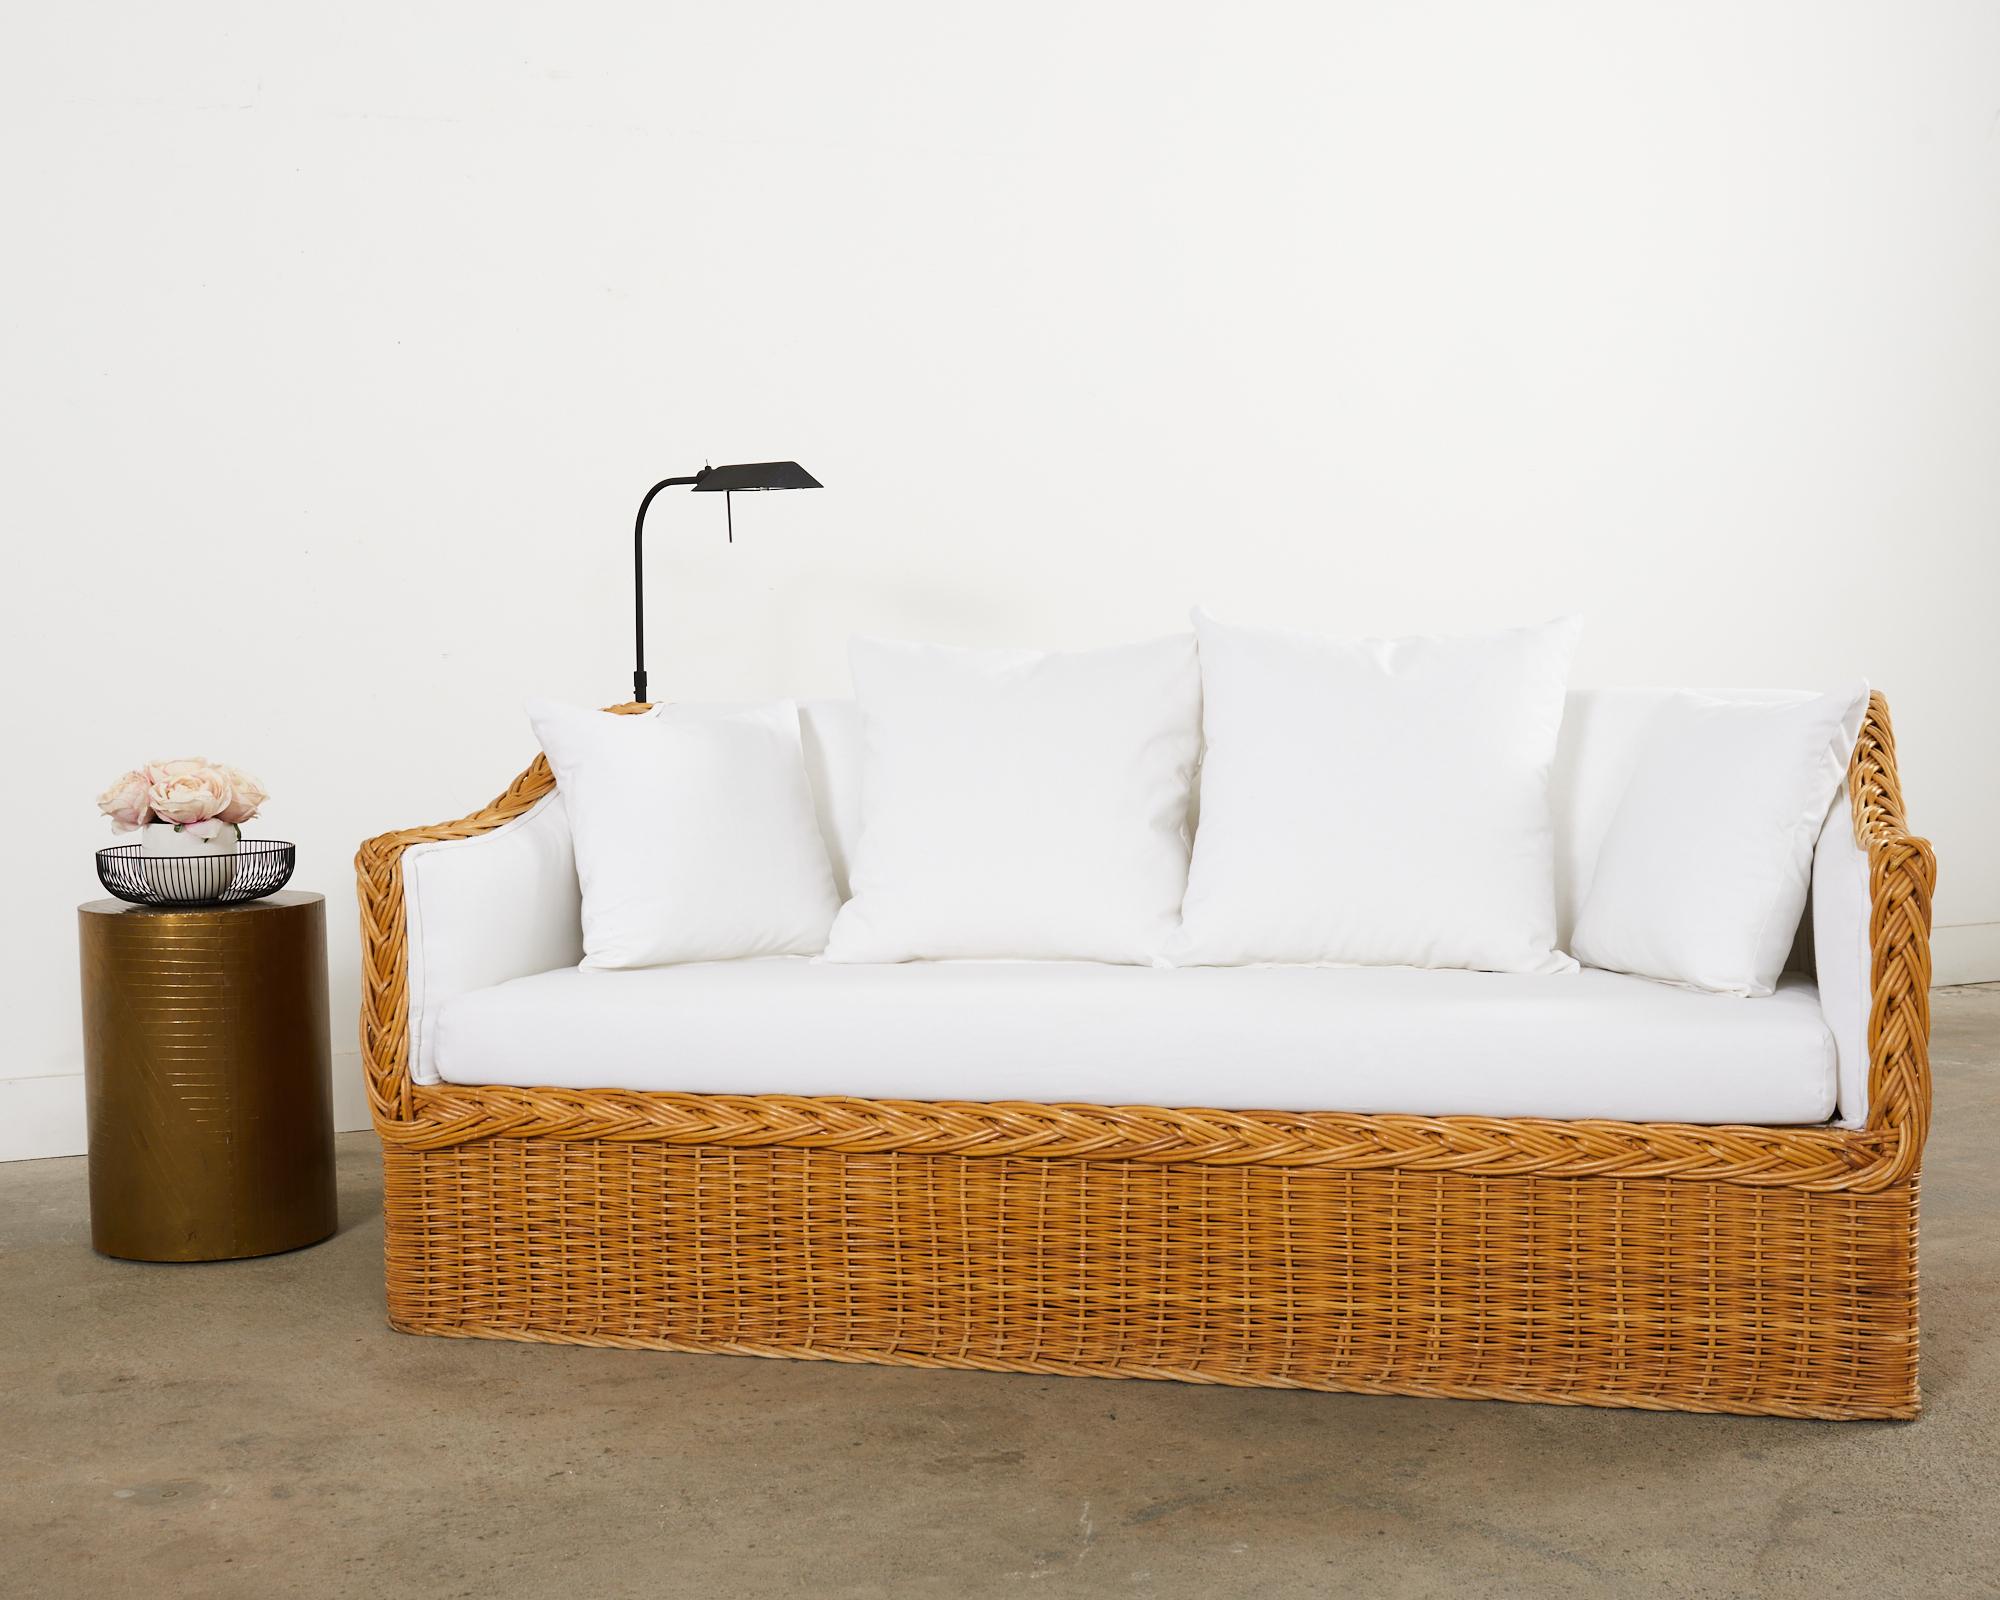 Gorgeous wicker rattan sofa settee made in the California coastal organic modern style and manner of Michael Taylor. Attributed to Wicker Works in San Francisco the sofa features a wood frame covered with woven wicker having a braided rattan border.